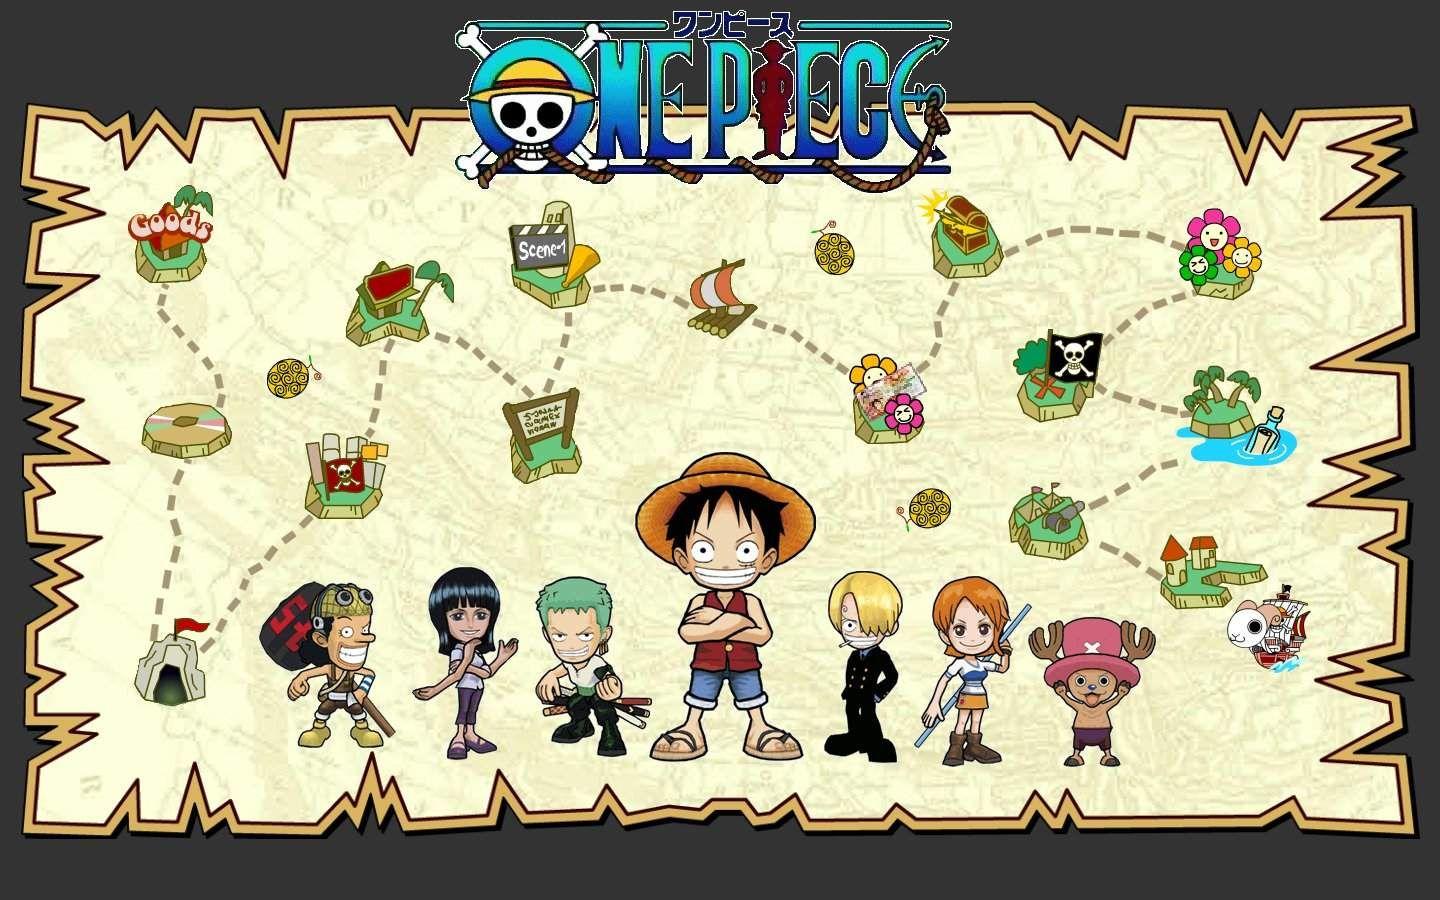 Looking for cute One Piece chibi wallpapers to decorate your phone? Look no further! Our updated collection for 2024 features all of your favorite characters in adorable chibi form. Whether you love Monkey D. Luffy, Roronoa Zoro, or Nami, you\'ll find the perfect wallpaper to show your love for One Piece. Download them now and brighten up your phone!